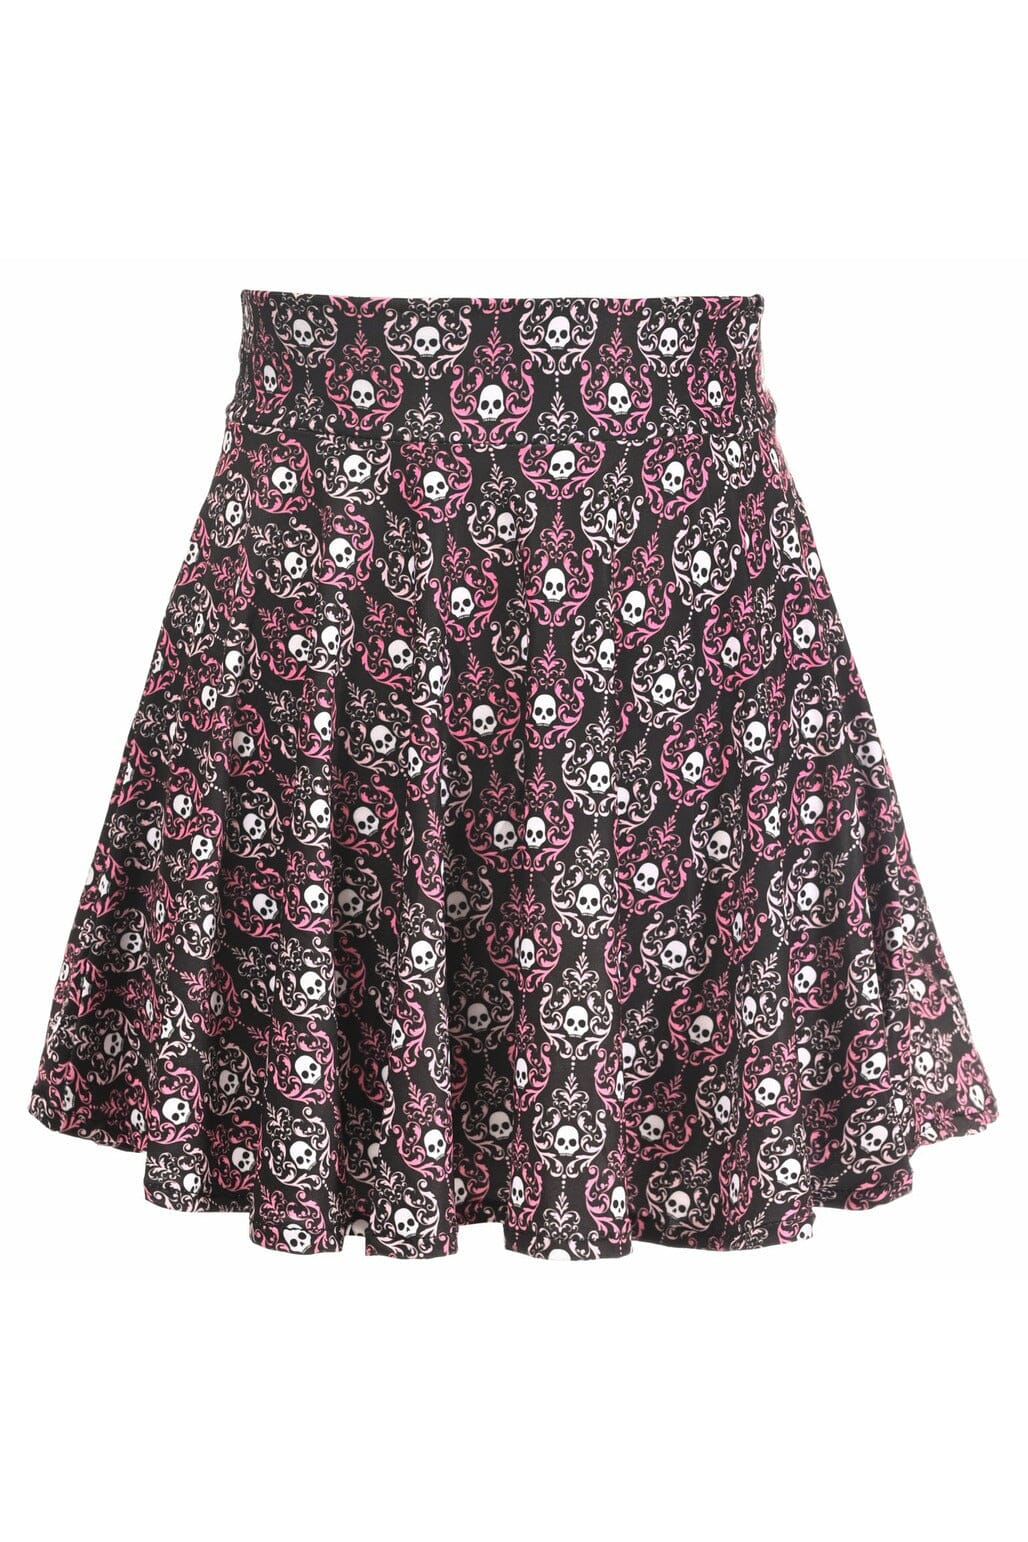 Pink & White Skulls Stretch Lycra Skirt-Costume Skirts-Daisy Corsets-Pink-XS-SEXYSHOES.COM